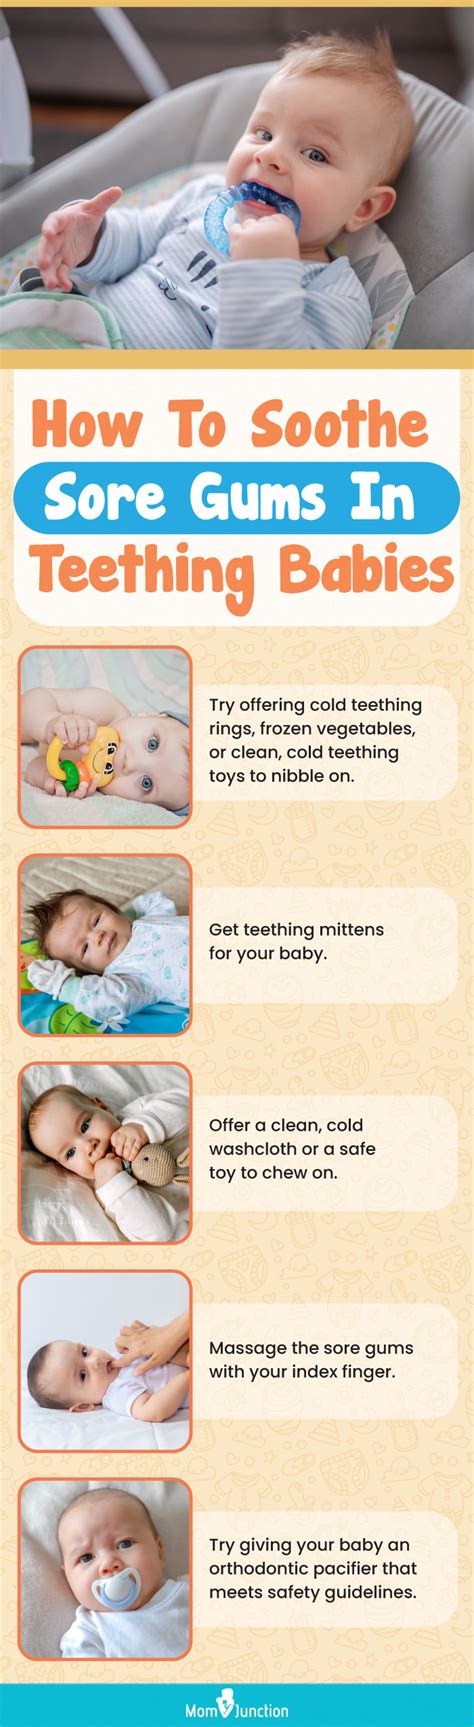 3 Month Olds Teething Signs And Tips For Soothing Sore Gums